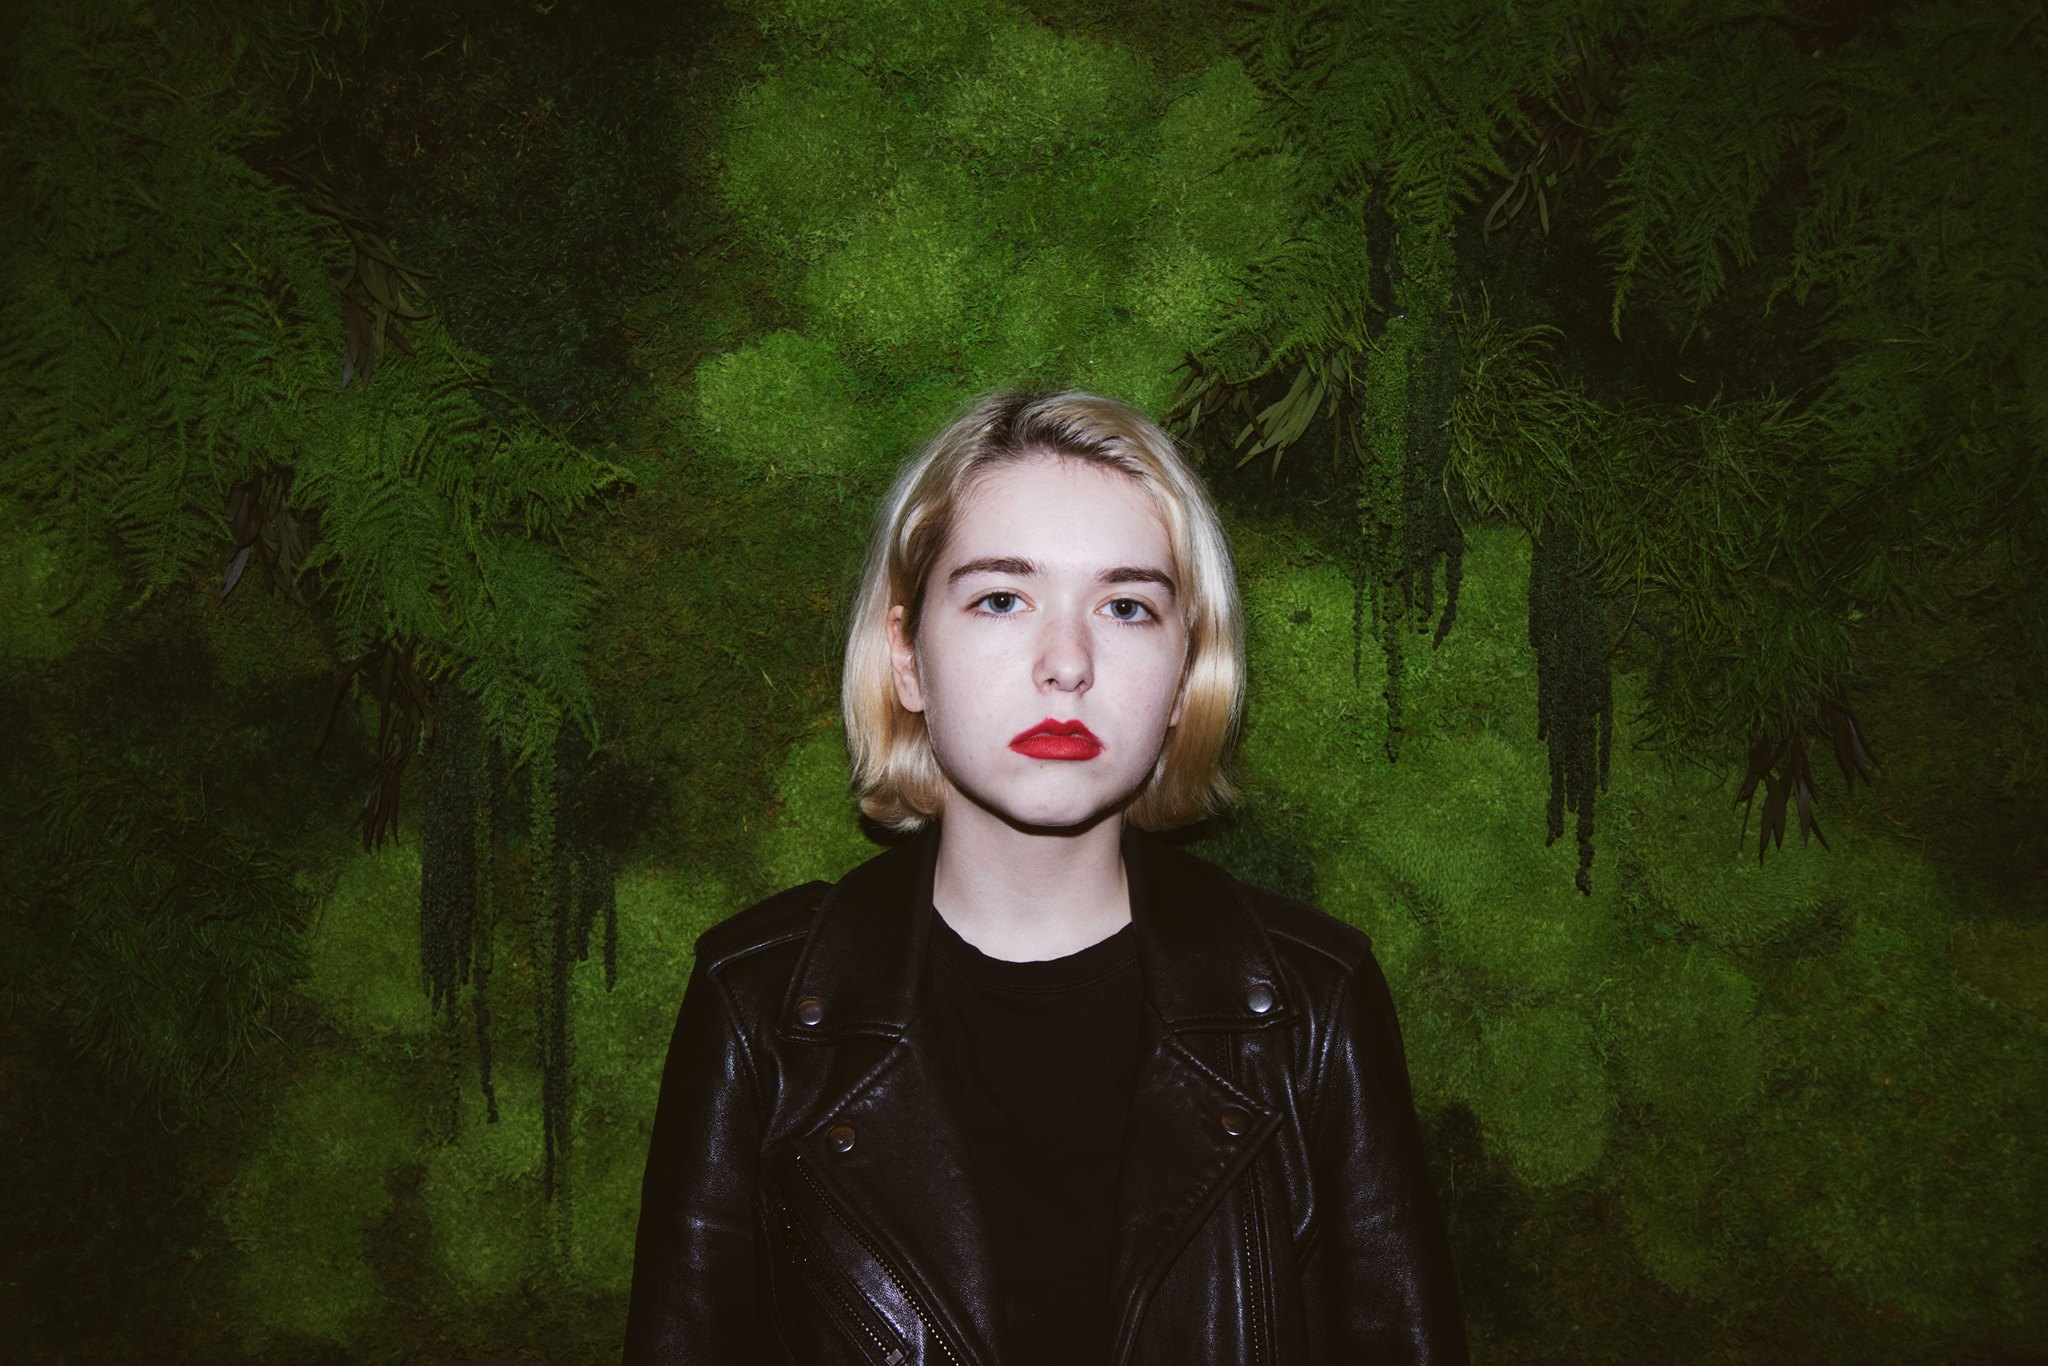 This Just In: Snail Mail AKA Lindsey Jordan To Play Thalia Hall July 20th